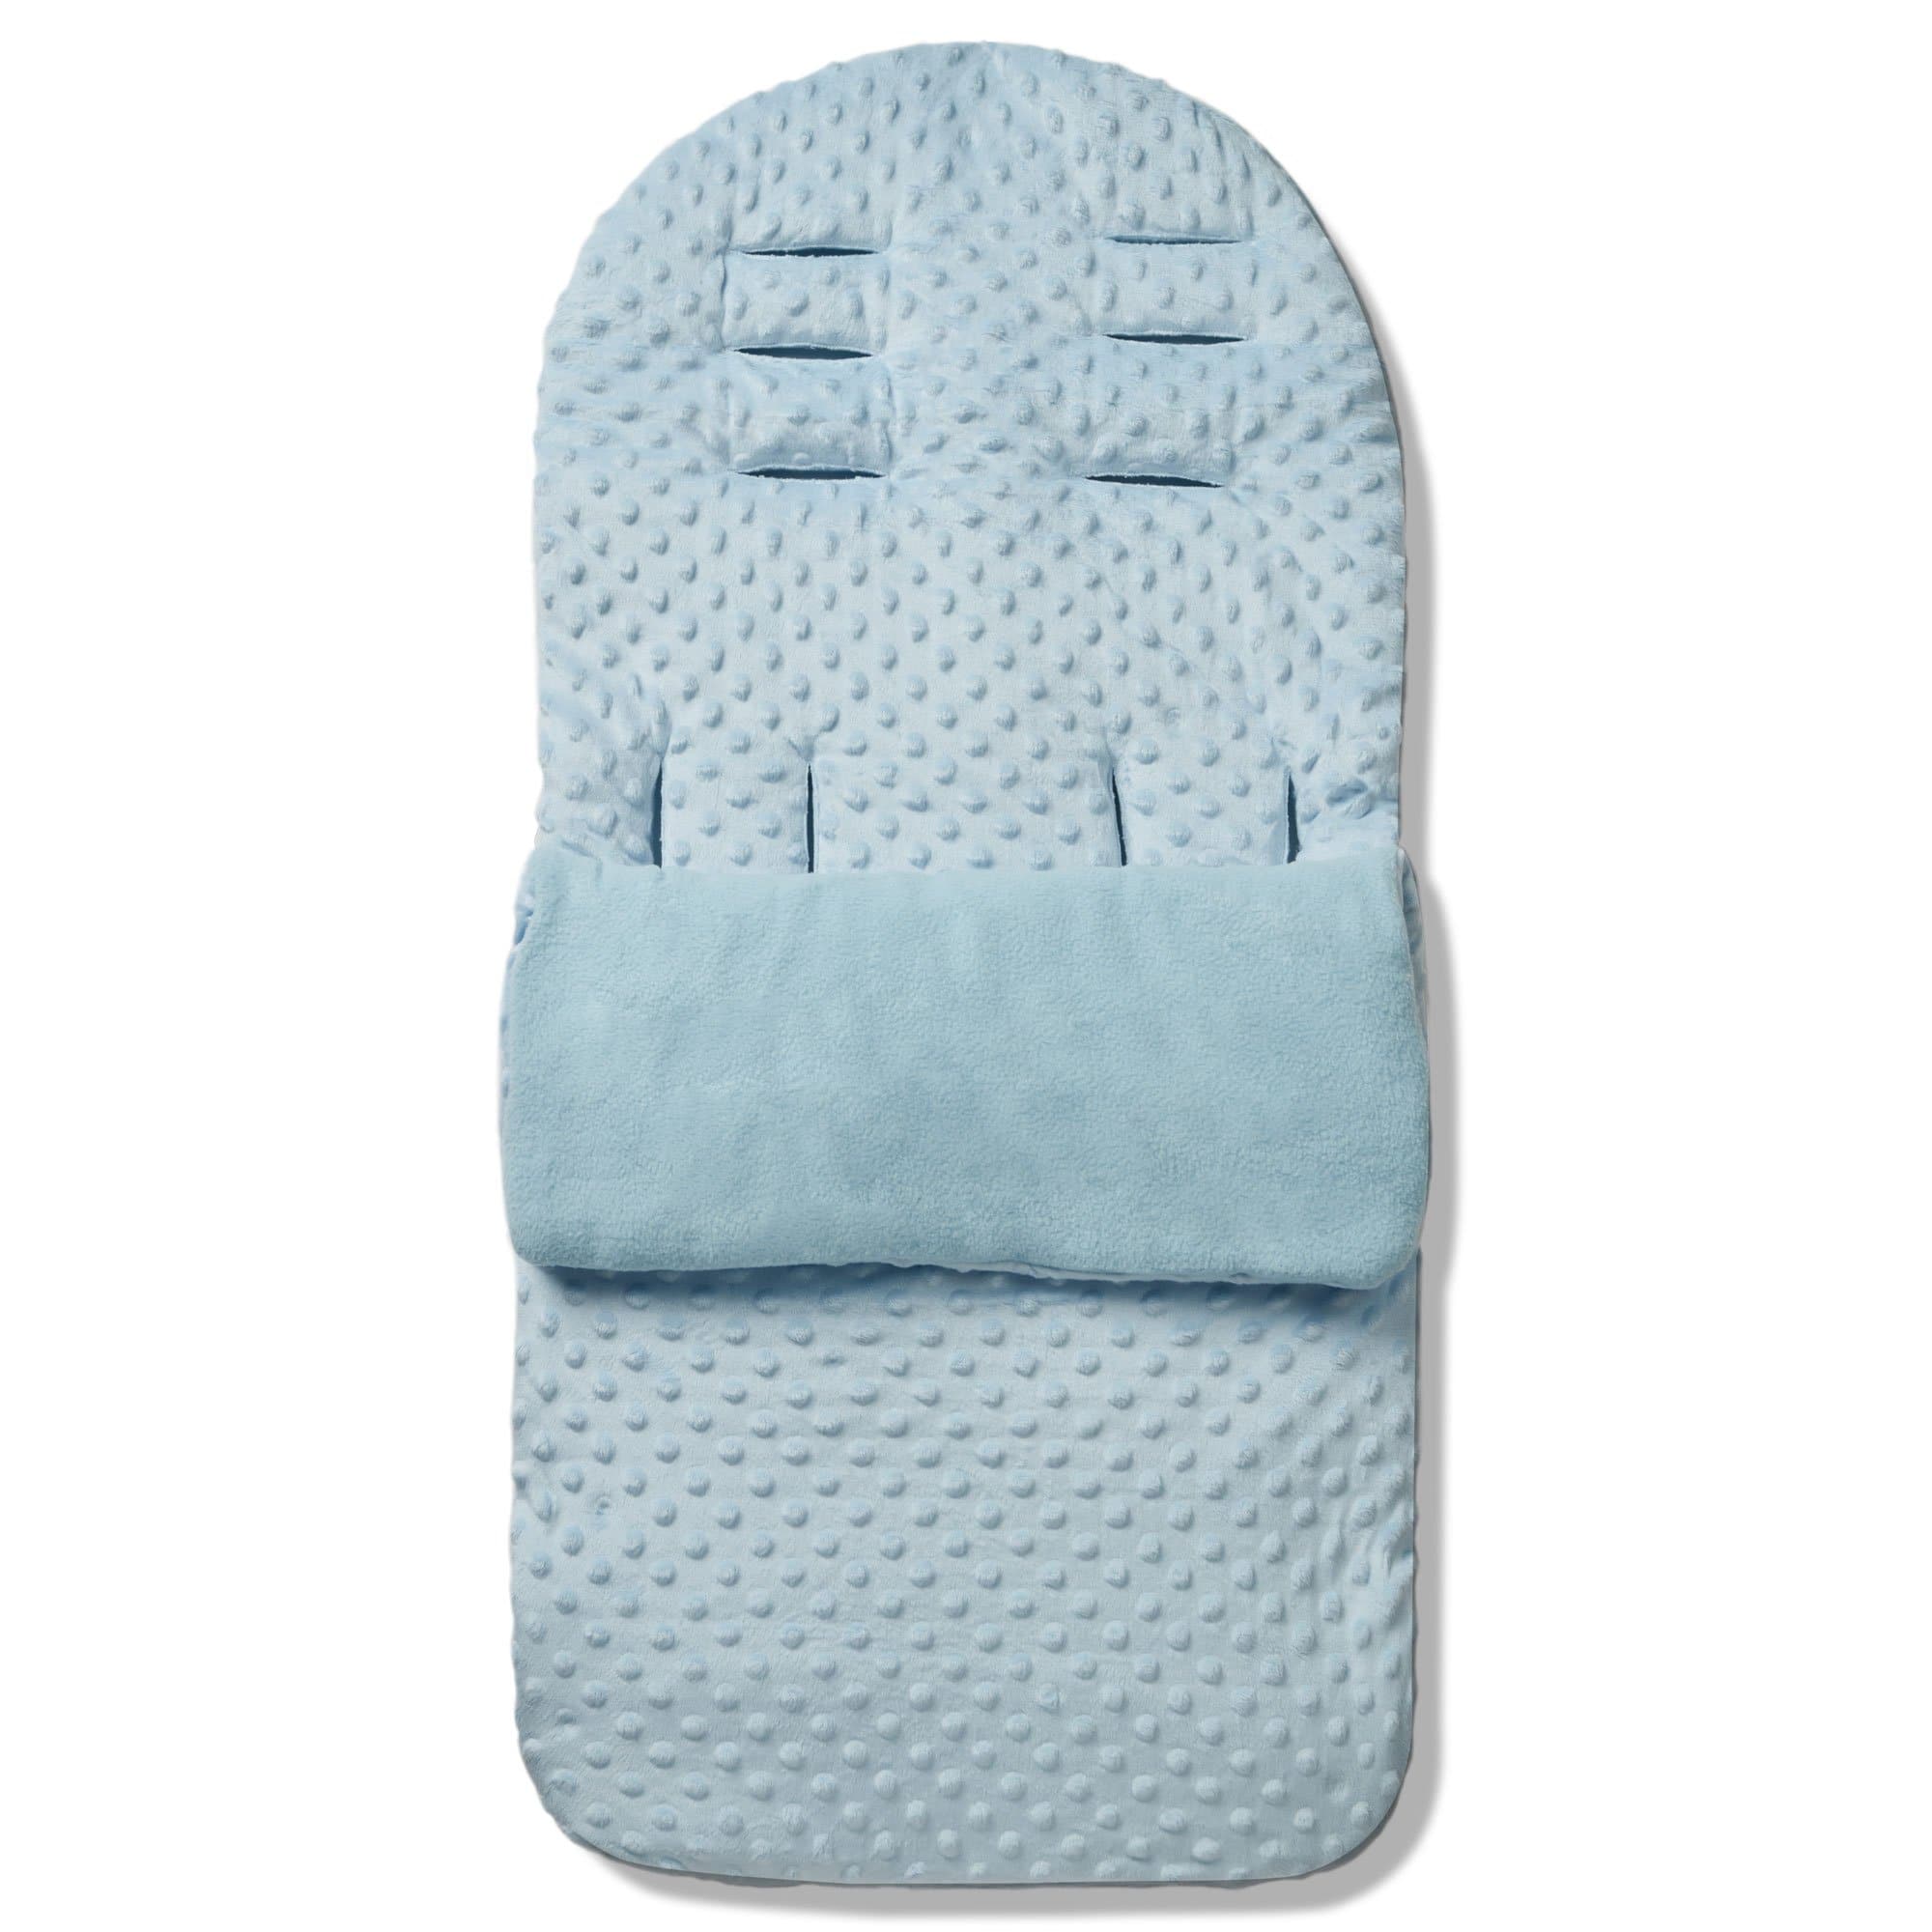 Dimple Footmuff / Cosy Toes Compatible with Emmaljunga - Blue / Fits All Models | For Your Little One